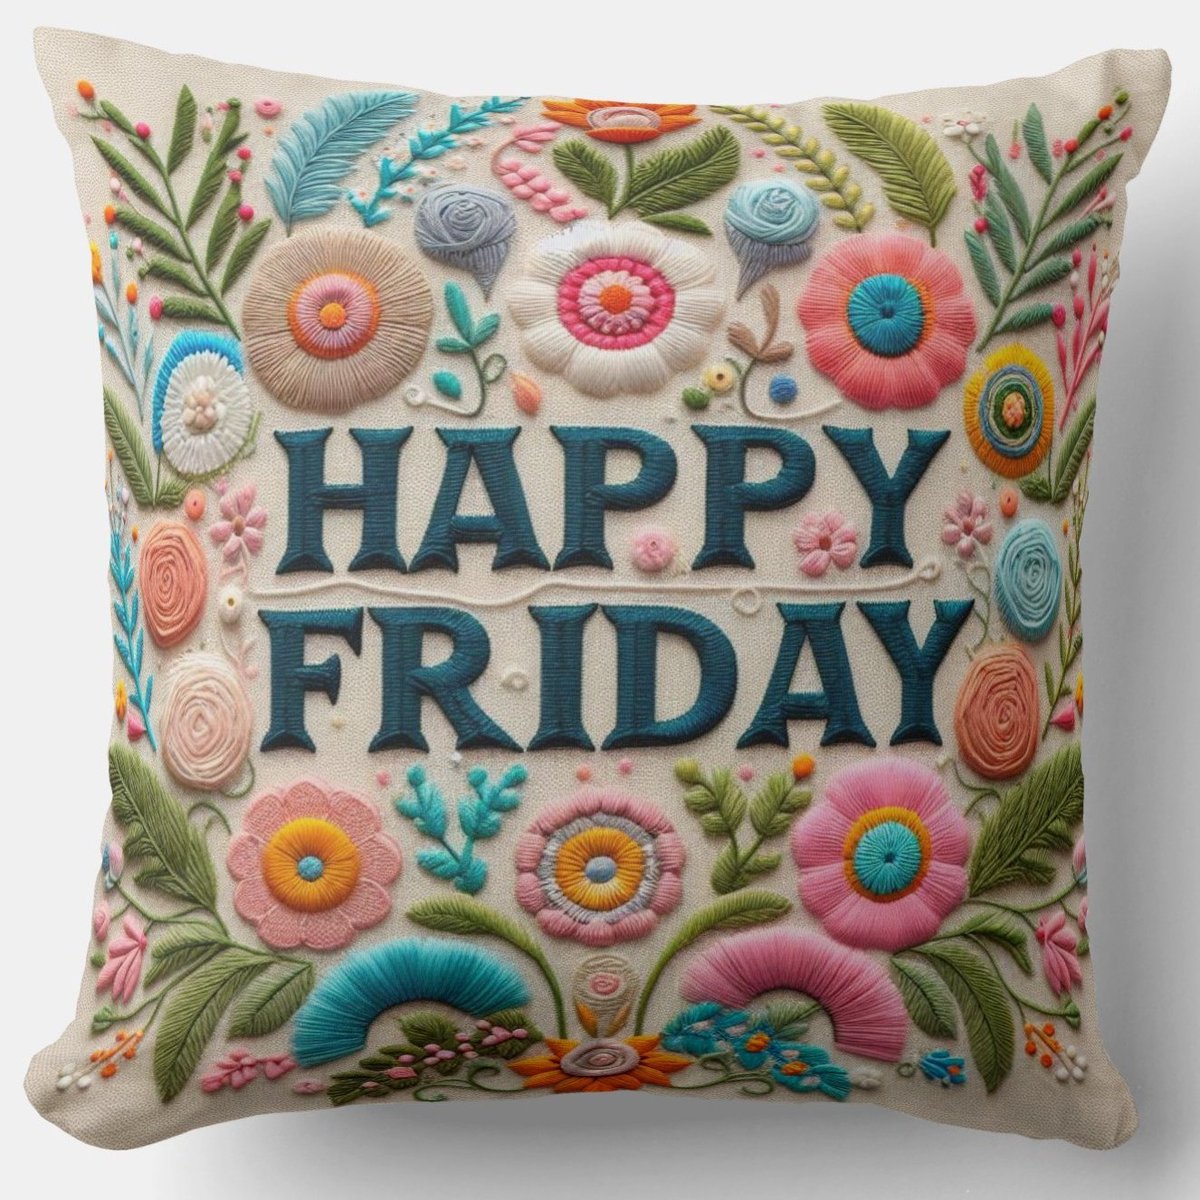 Happy Friday Throw Pillow zazzle.com/elegant_happy_… A Perfect Way to Welcome The Well Deserved Break From The Work Week #FridayMotivation #FridayFeeling #fridaymorning #FridayFun #FridayThoughts #HappyFriday #FridayVibes #weekend #pillow #homedecoration #giftideas #FlowersOnFriday